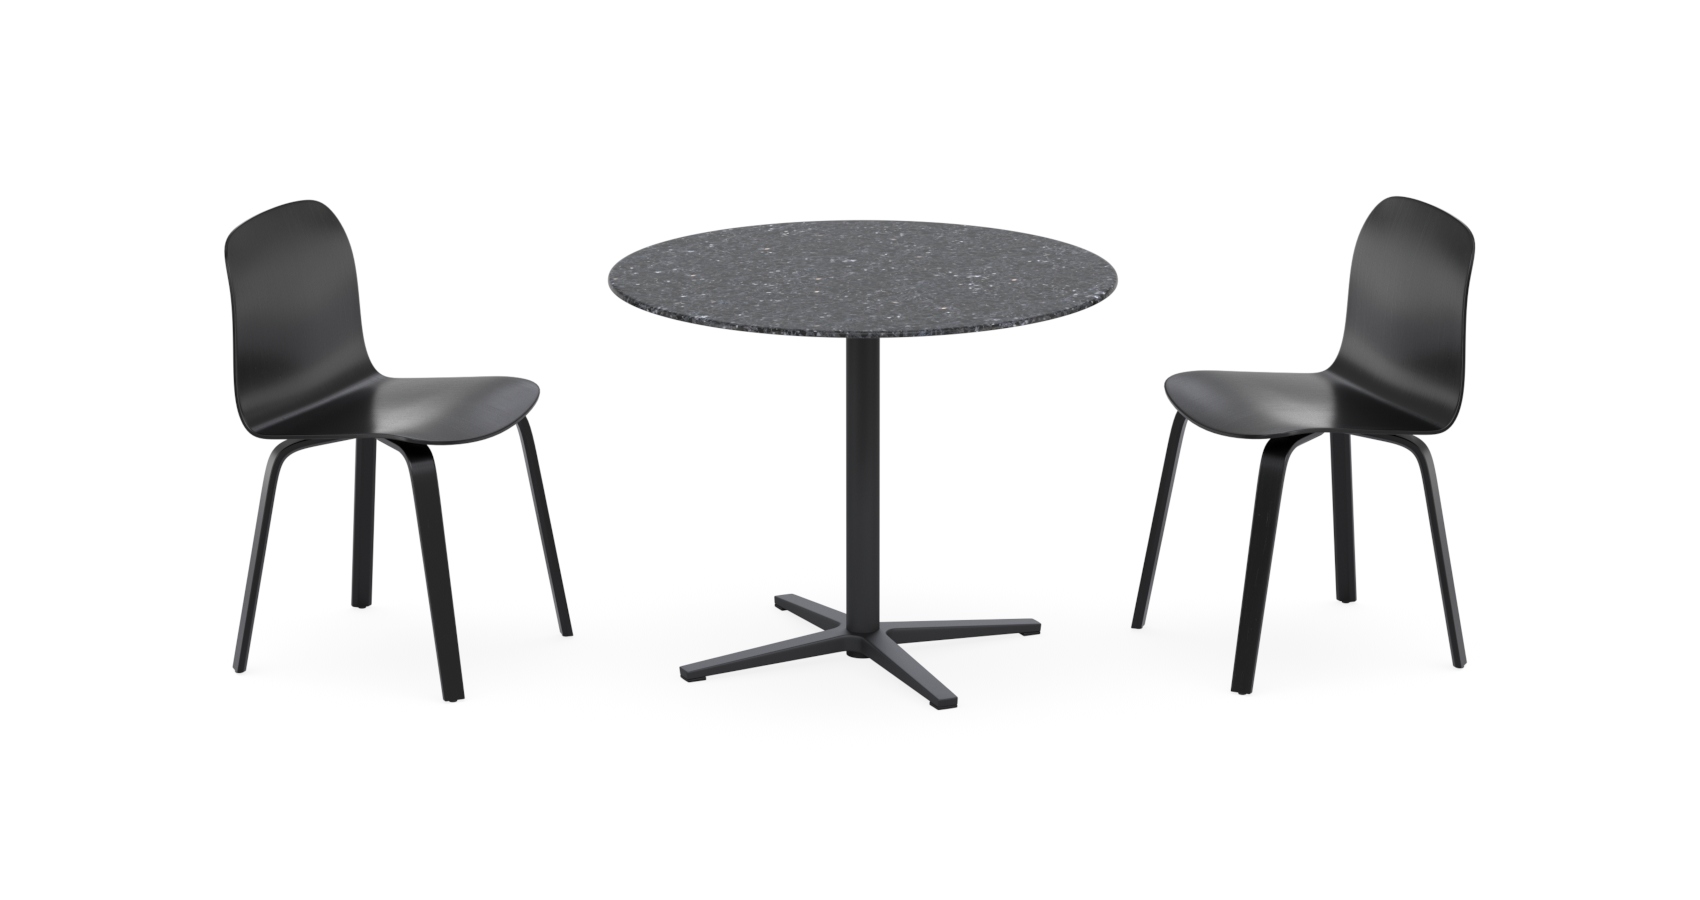 Wiz table with black base and round Night terrazzo top with Indi chairs in black